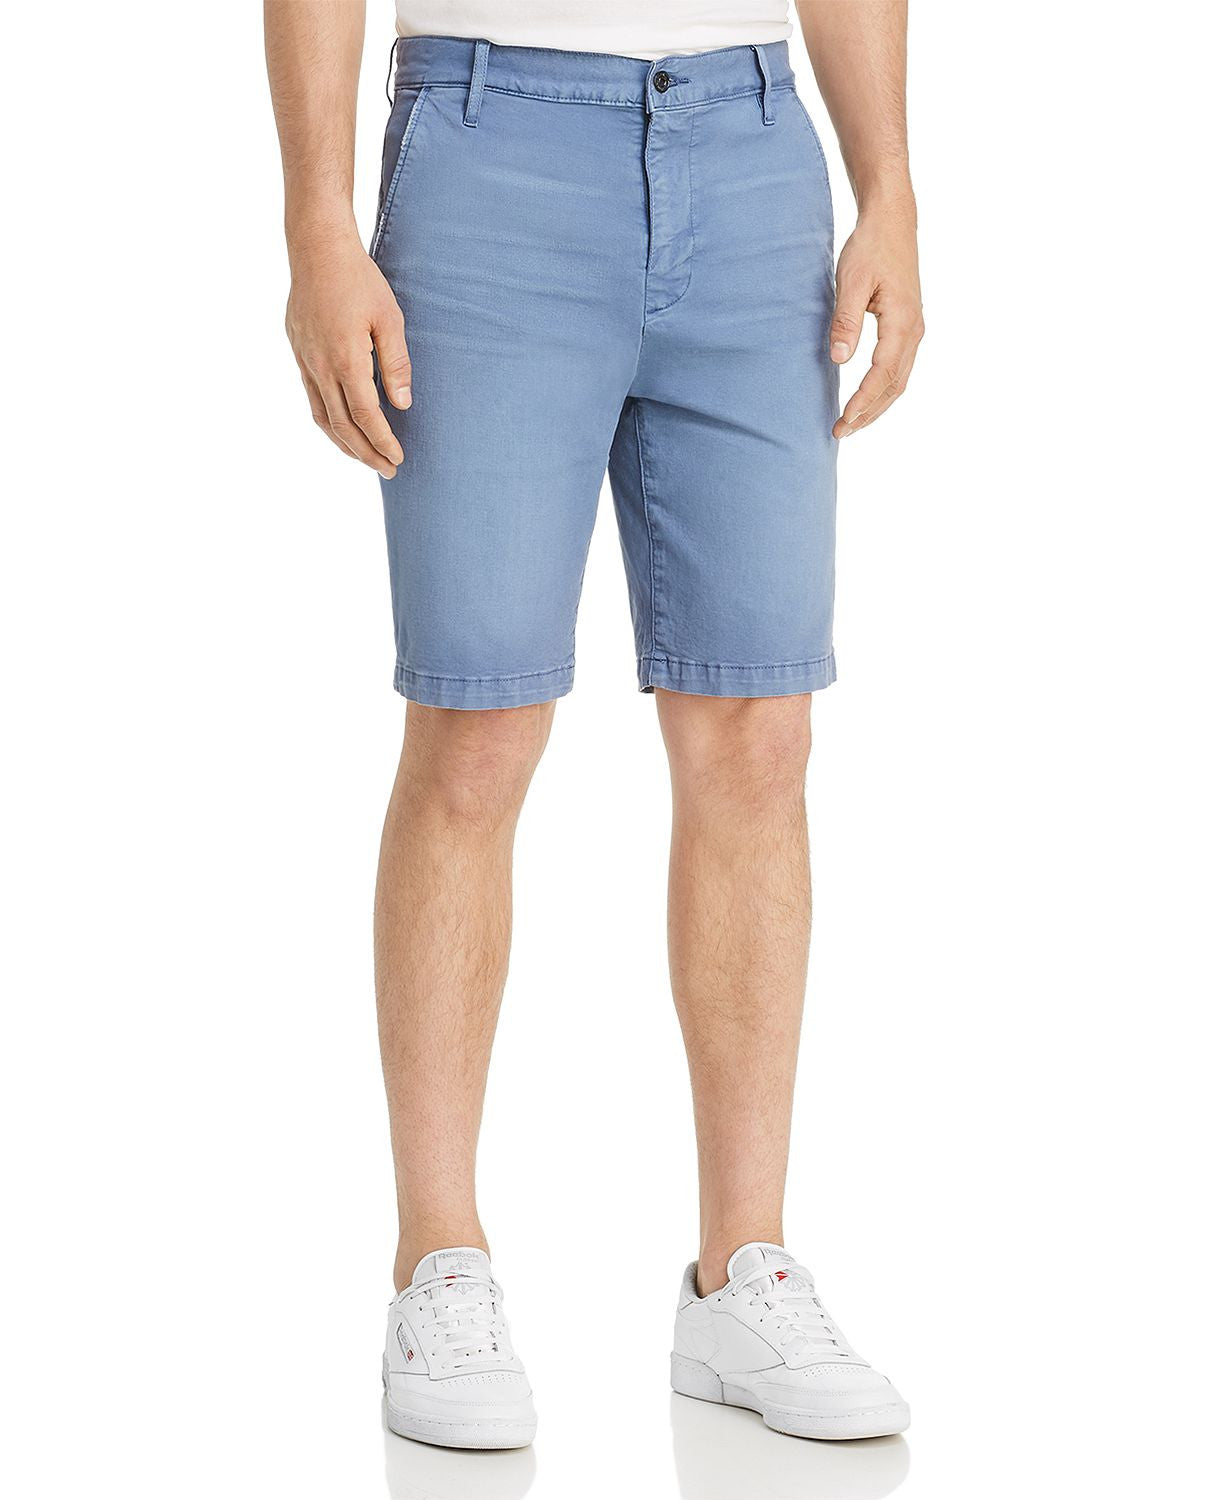 7 For All Mankind Slim Fit Chino Shorts French Blue